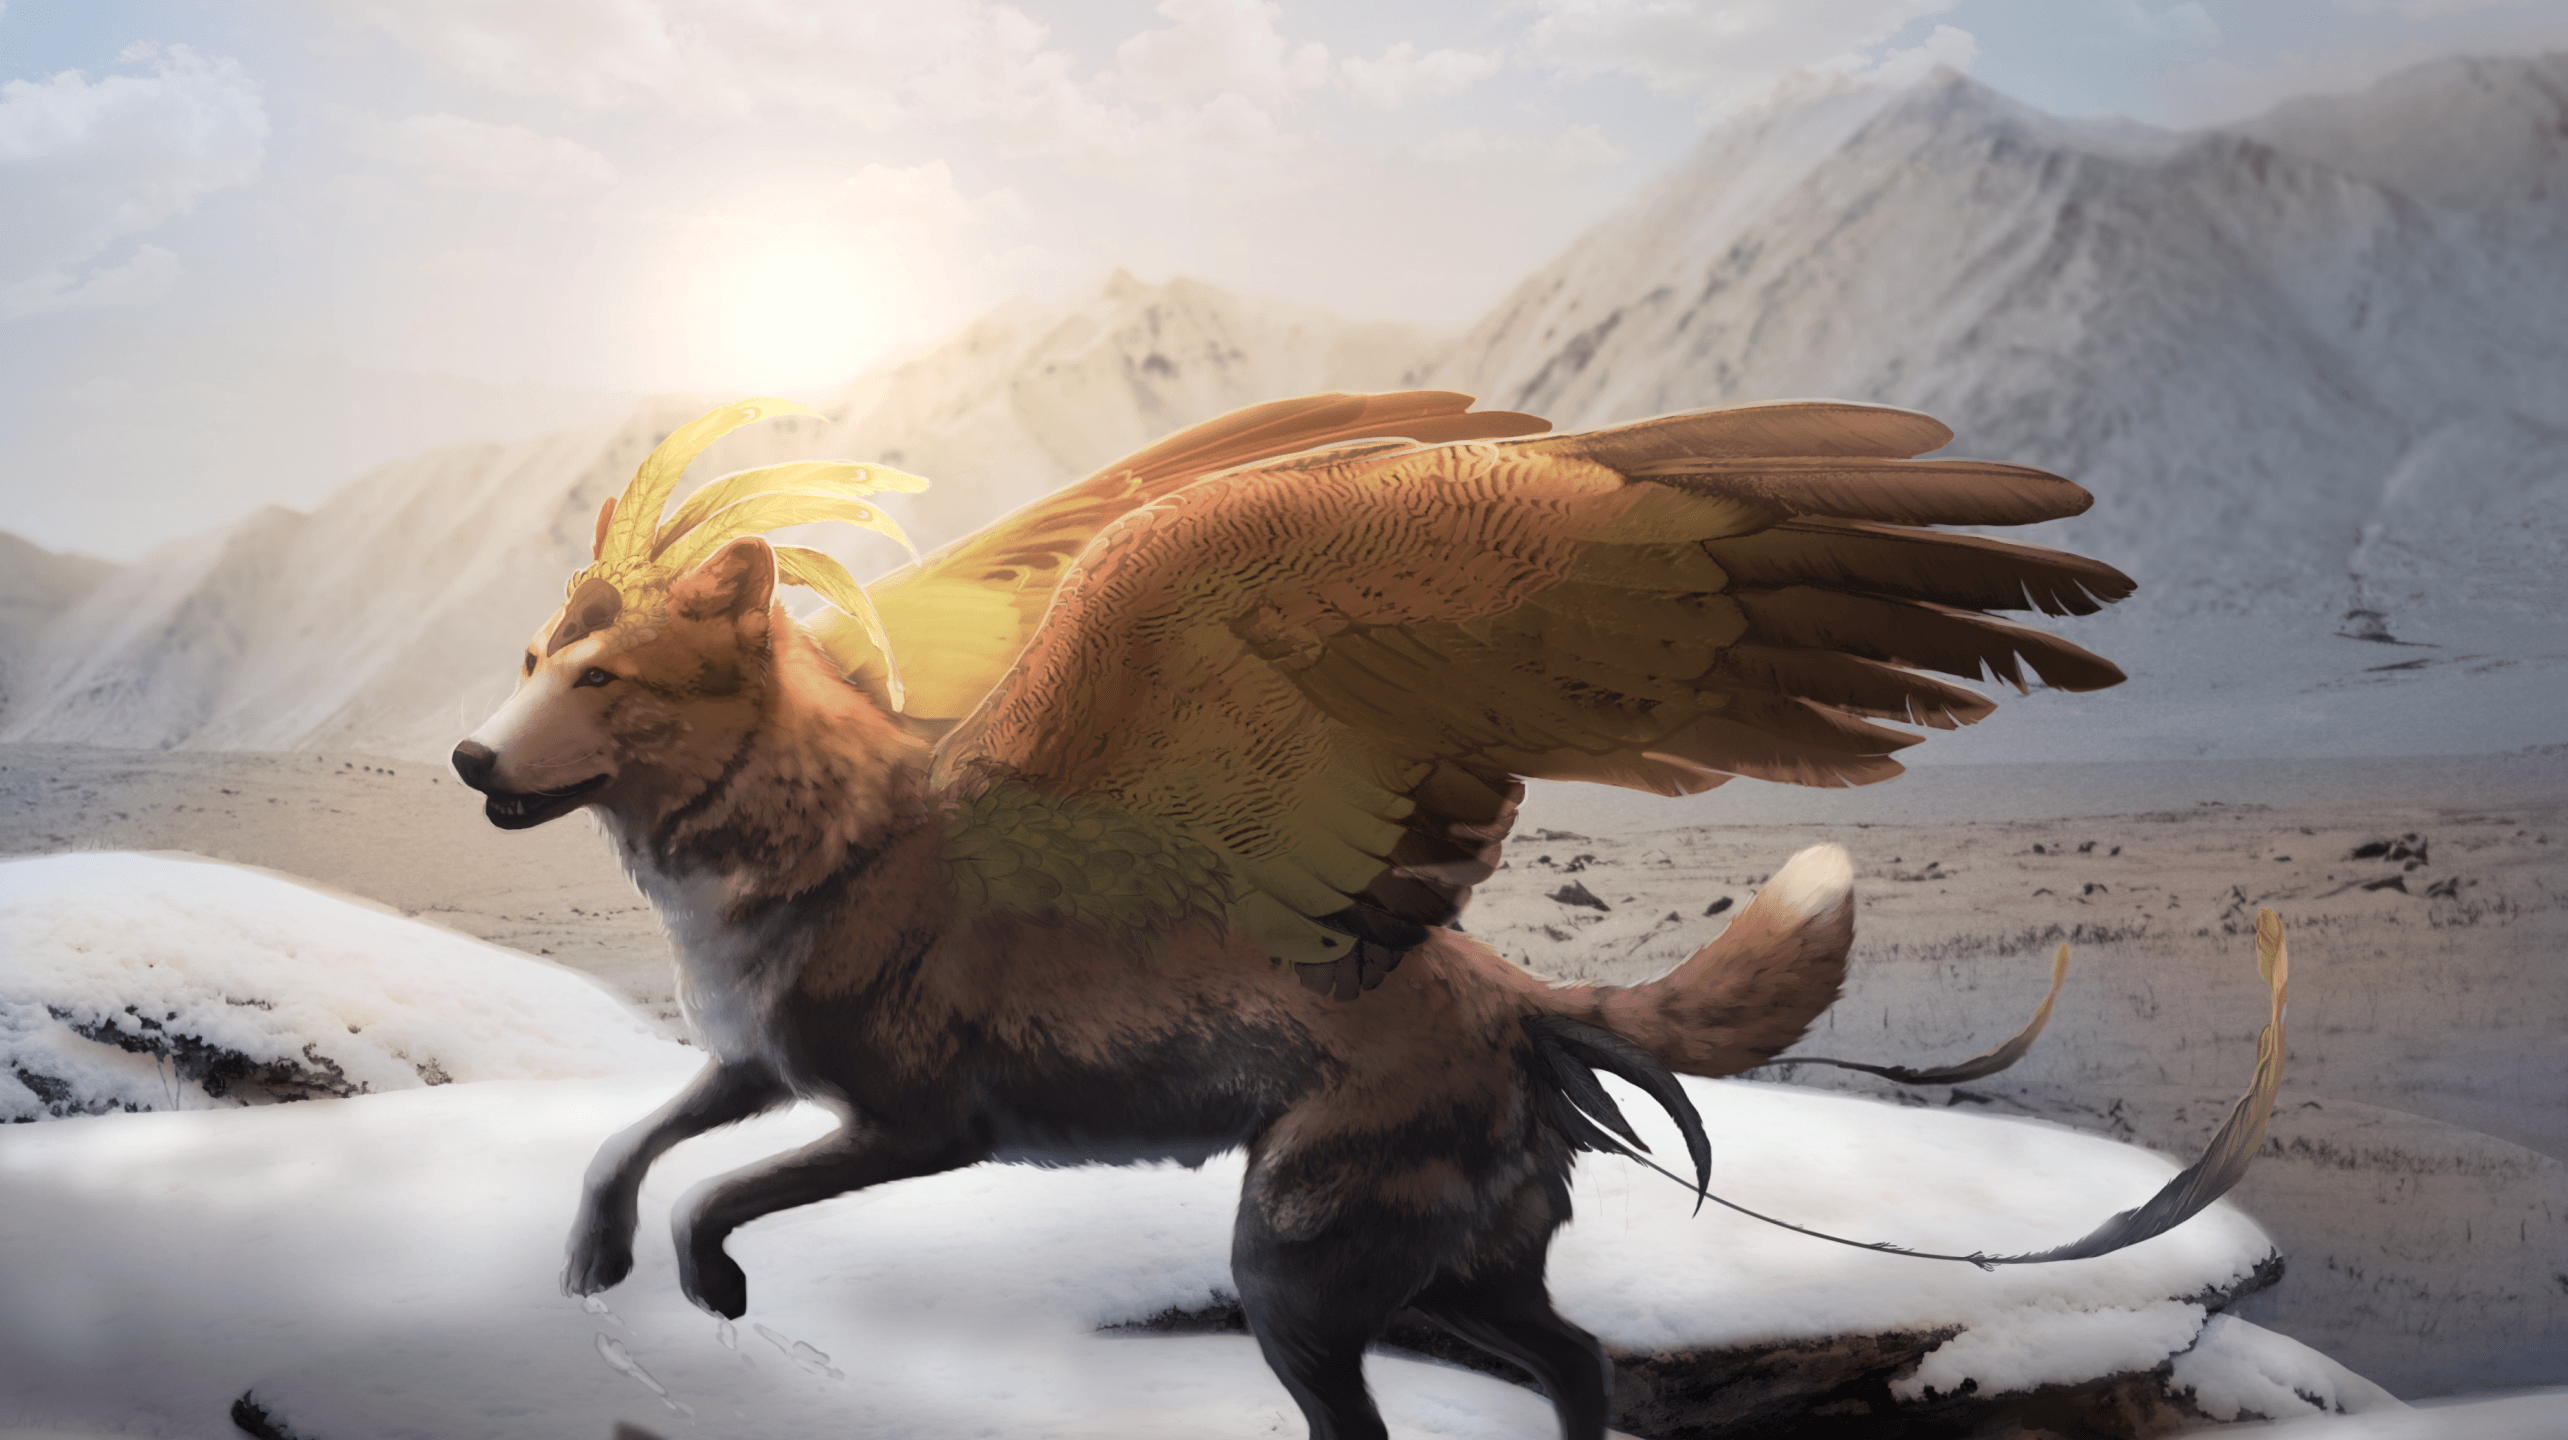 Download 2568x1440 Wolf With Wings, Fantasy Creature, Animal